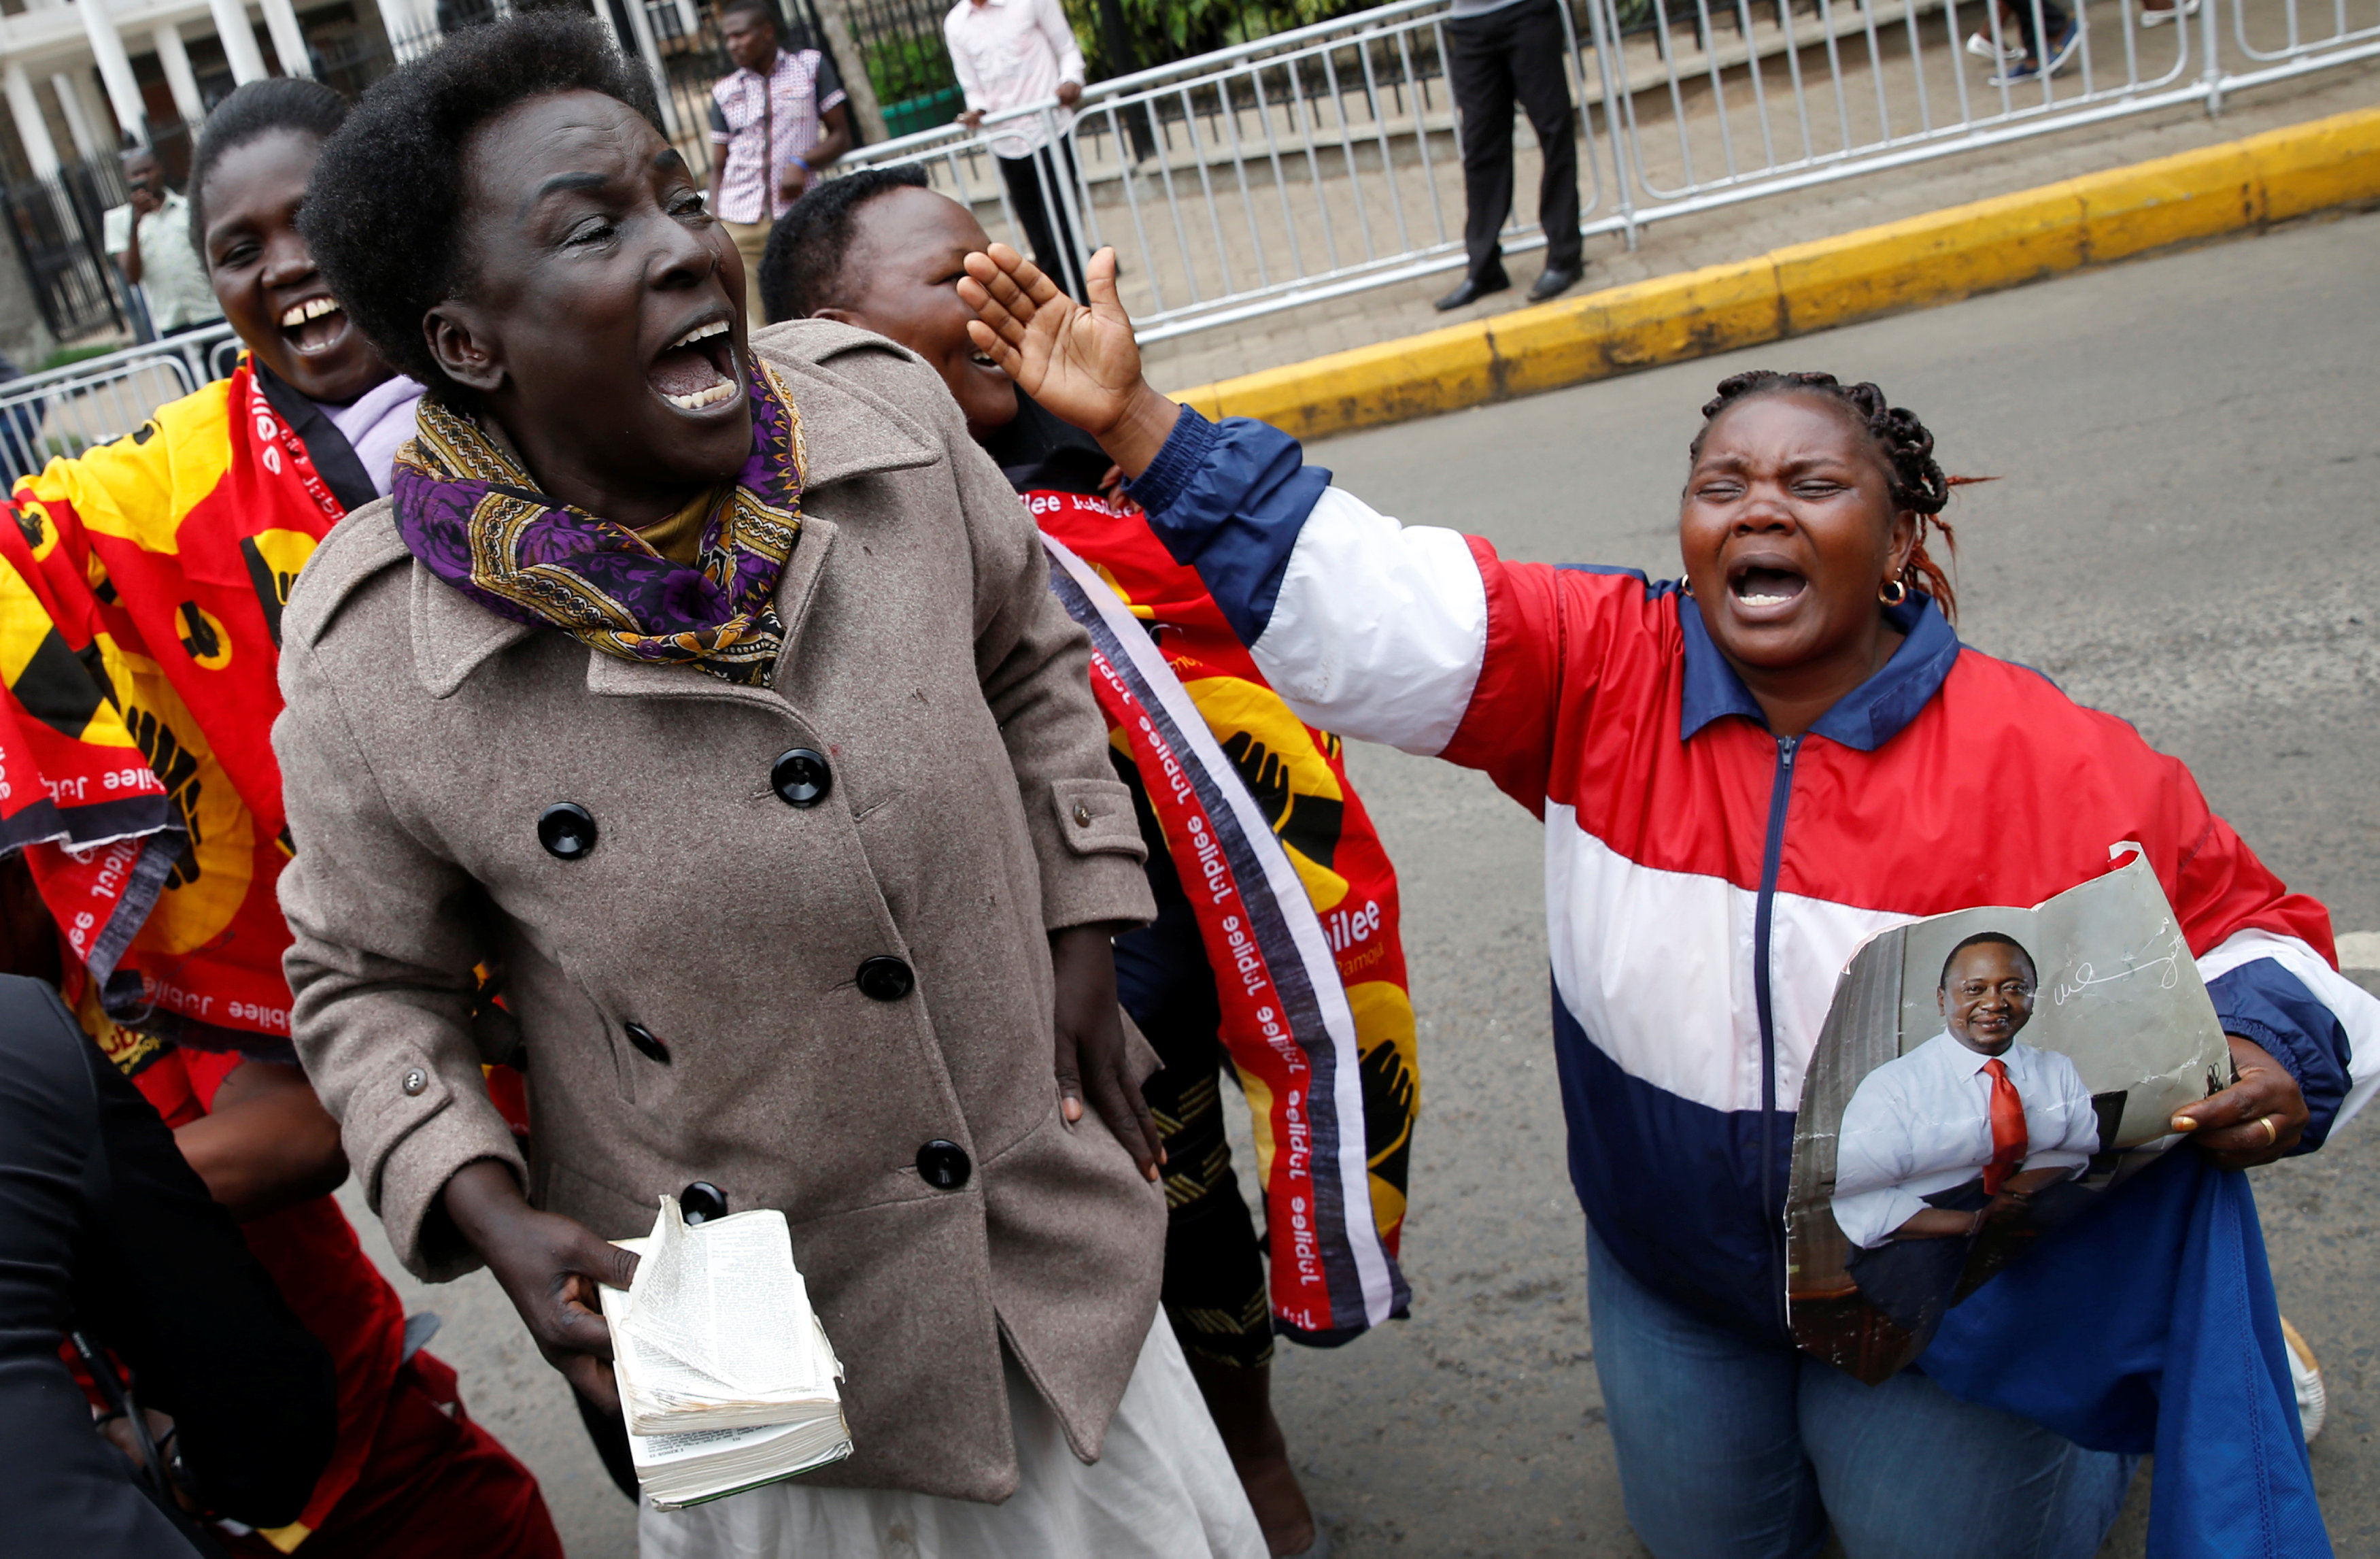 in pictures: Kenya's Jubilee Party supporters celebrate